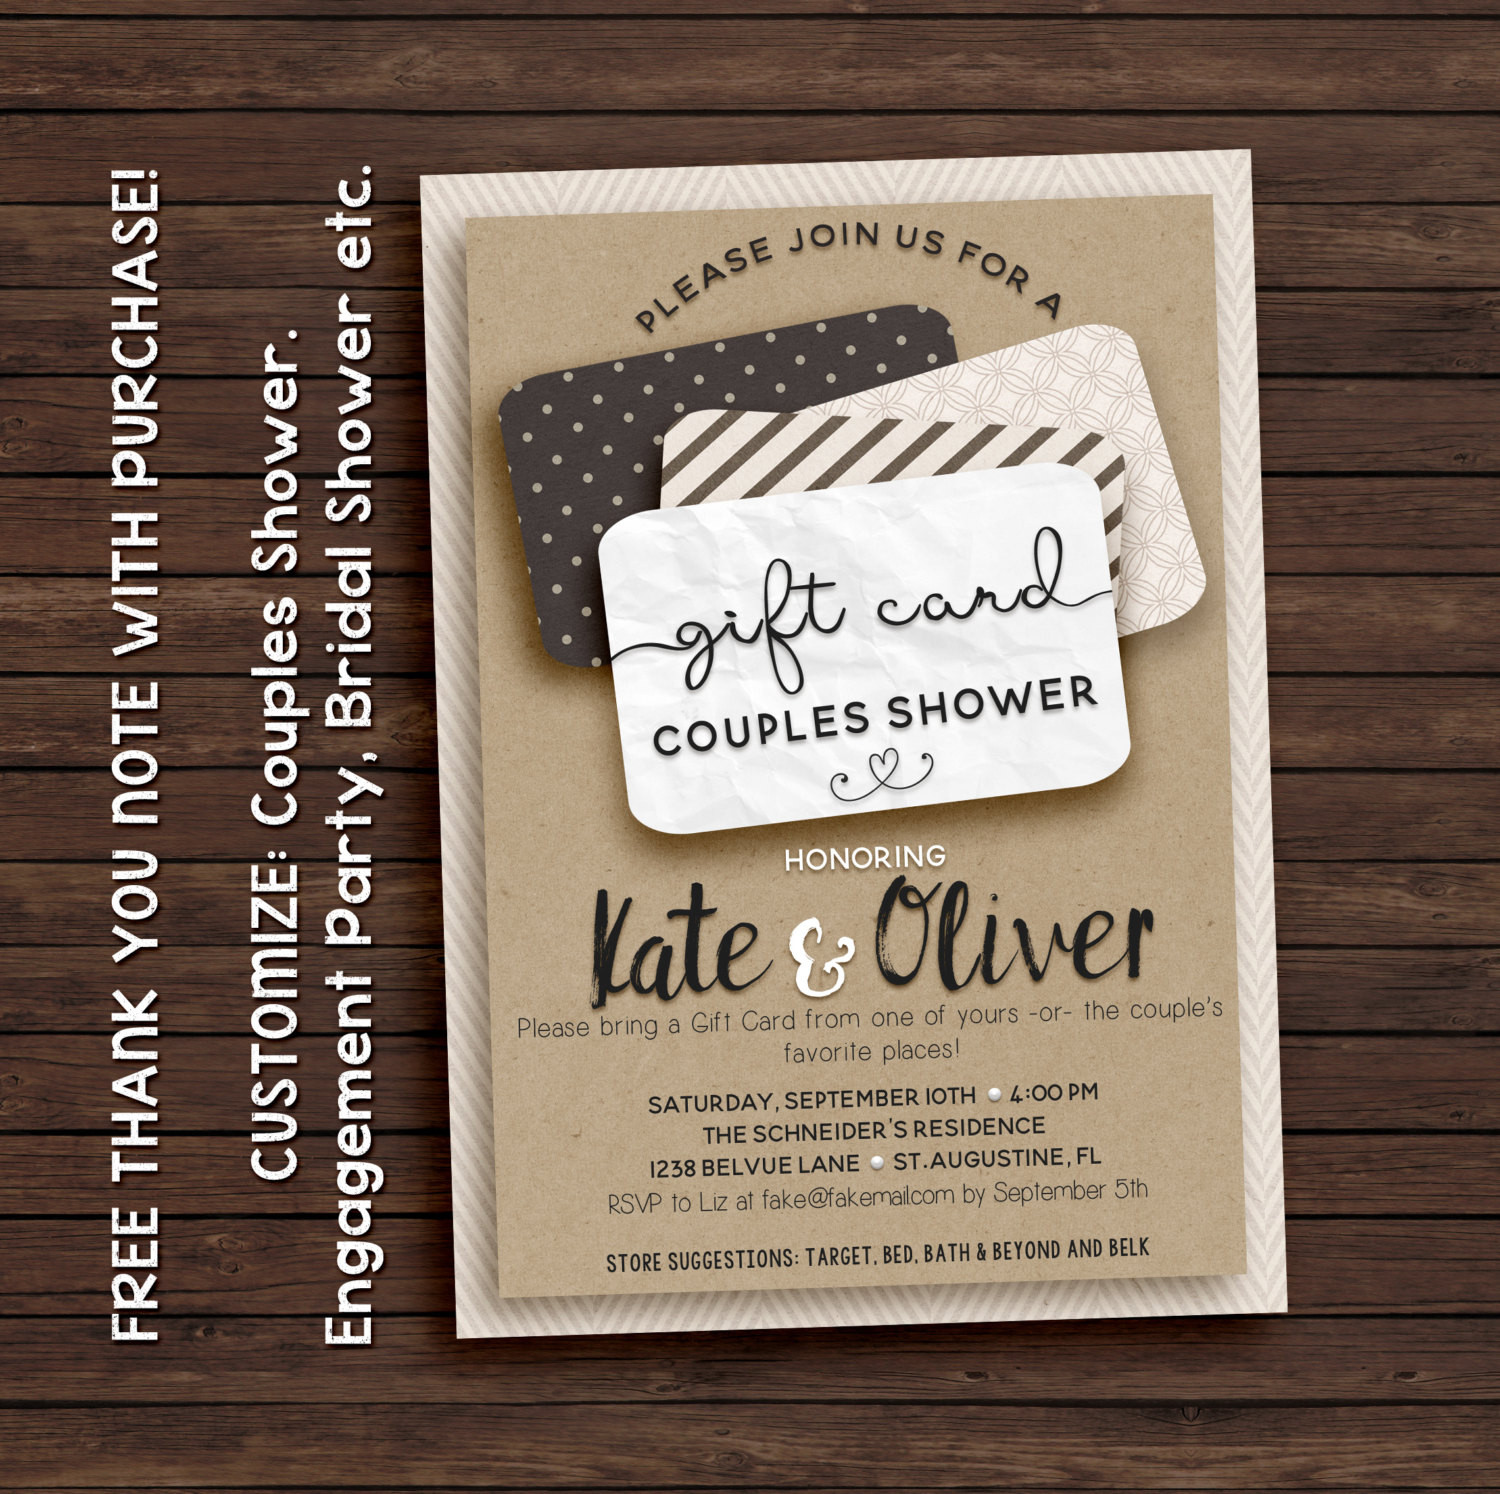 Gift Ideas For Couples Shower
 Couples shower invitation t card invitation printable